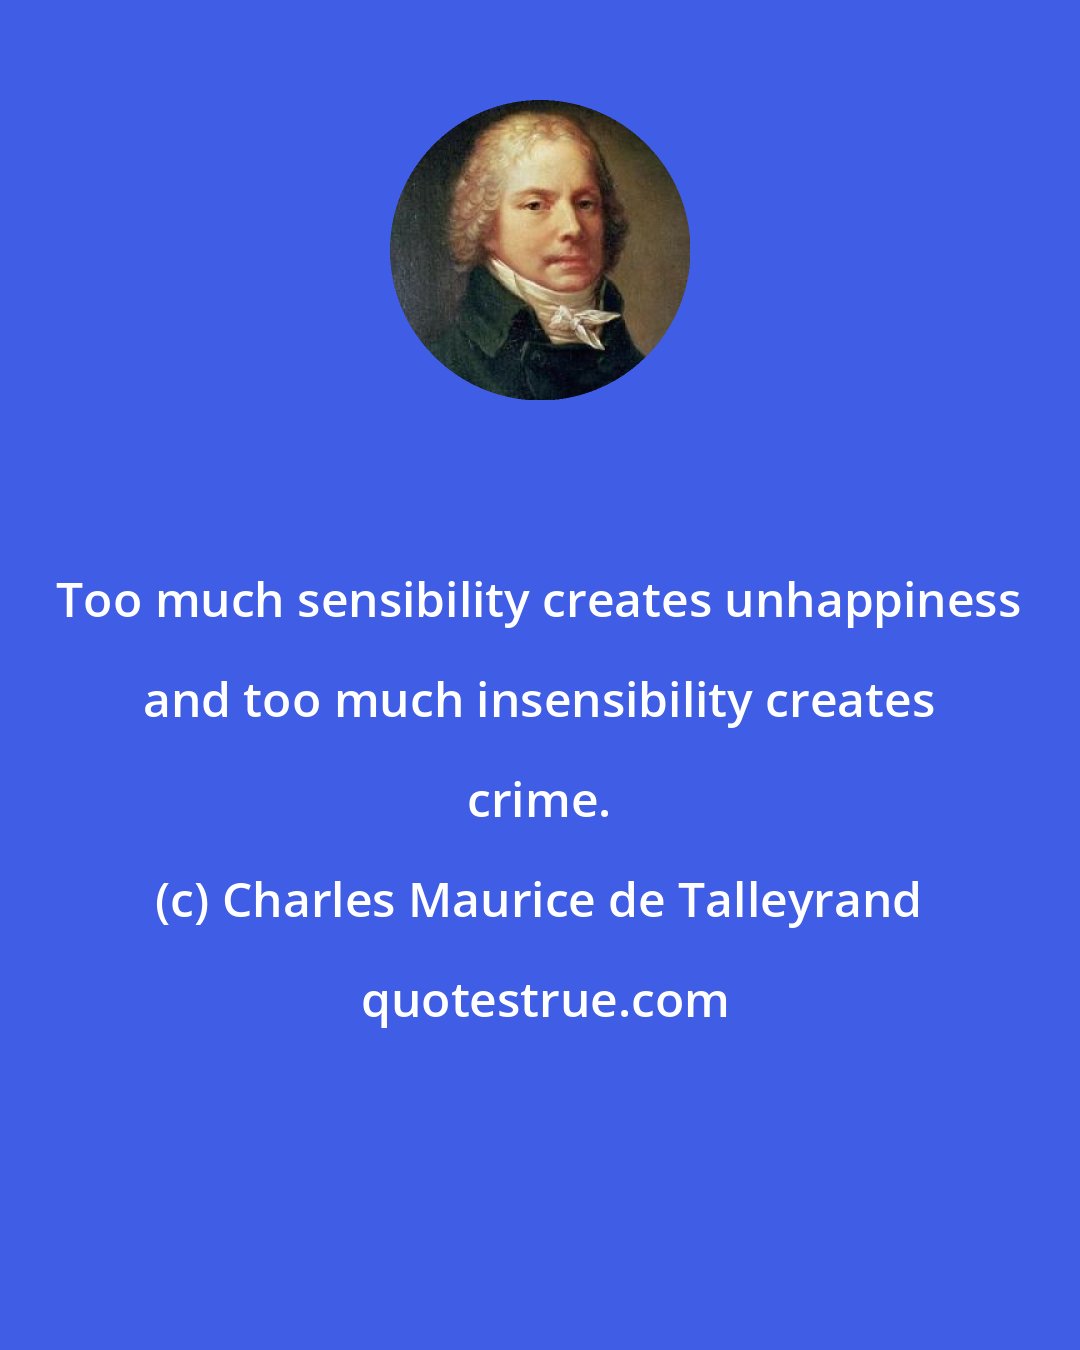 Charles Maurice de Talleyrand: Too much sensibility creates unhappiness and too much insensibility creates crime.